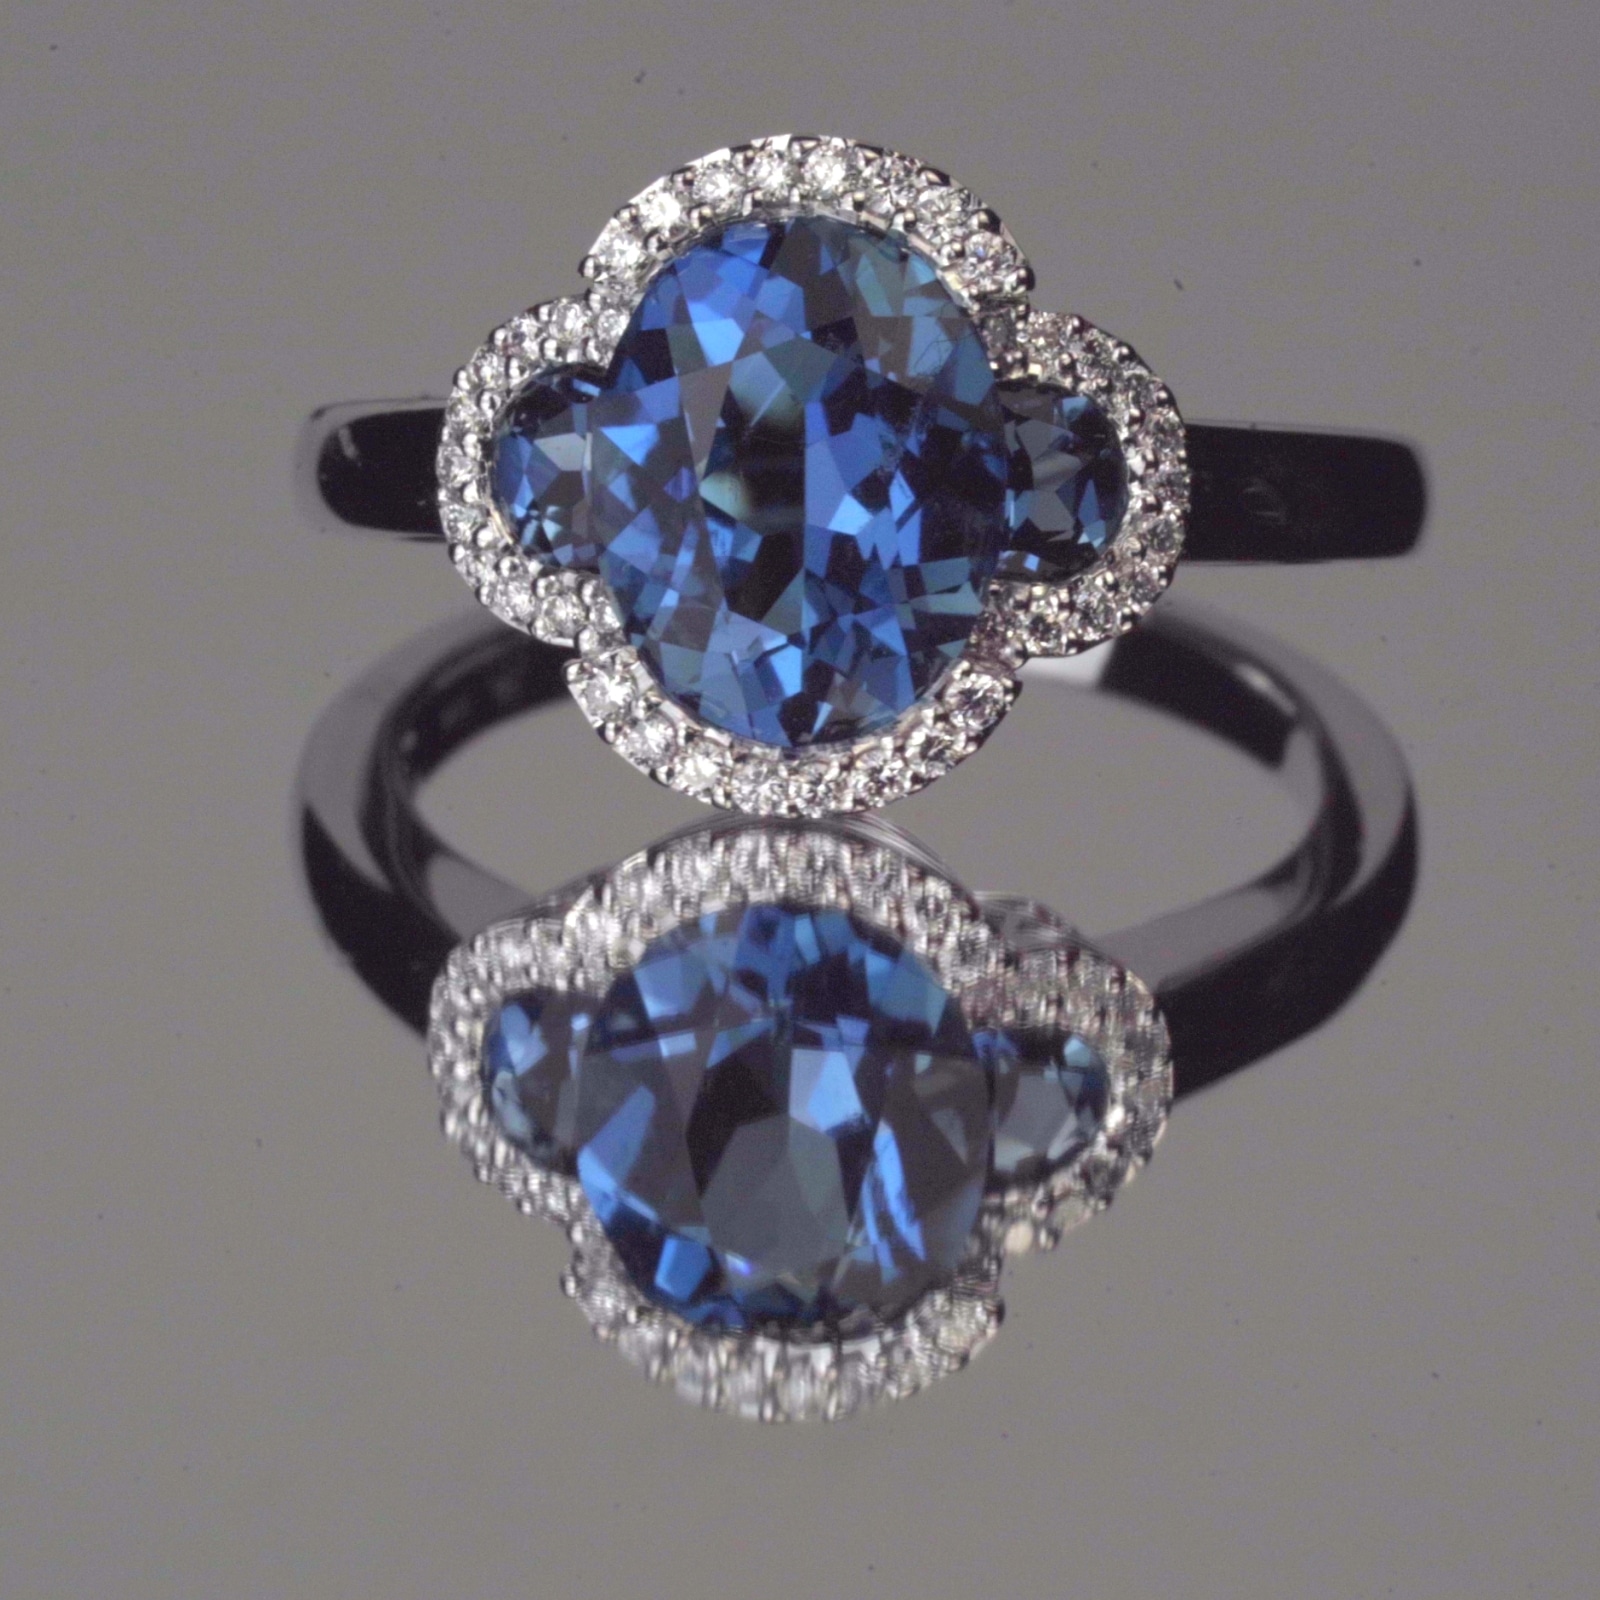 Solitaire sapphire ring with surrounded by diamonds